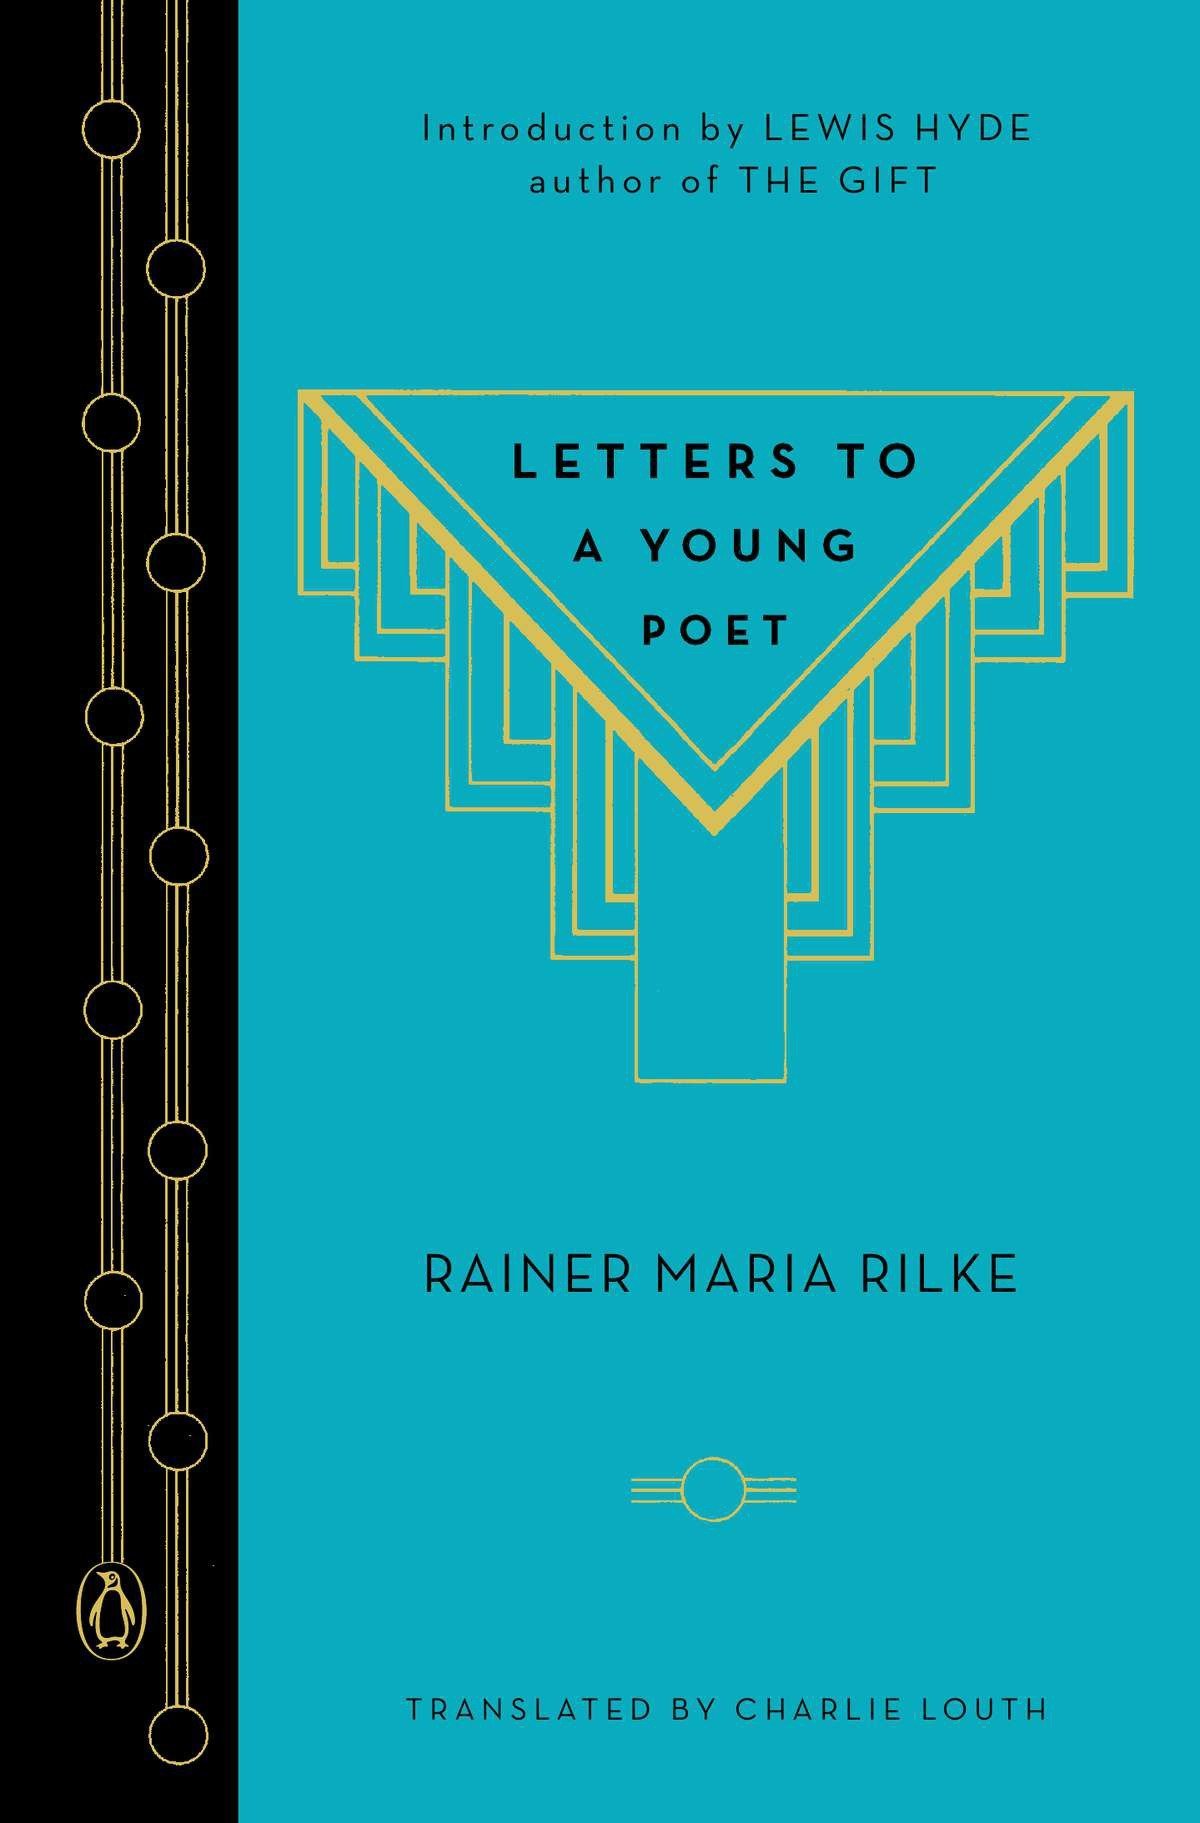 Letters to a Young Poet by Rainer Rilke